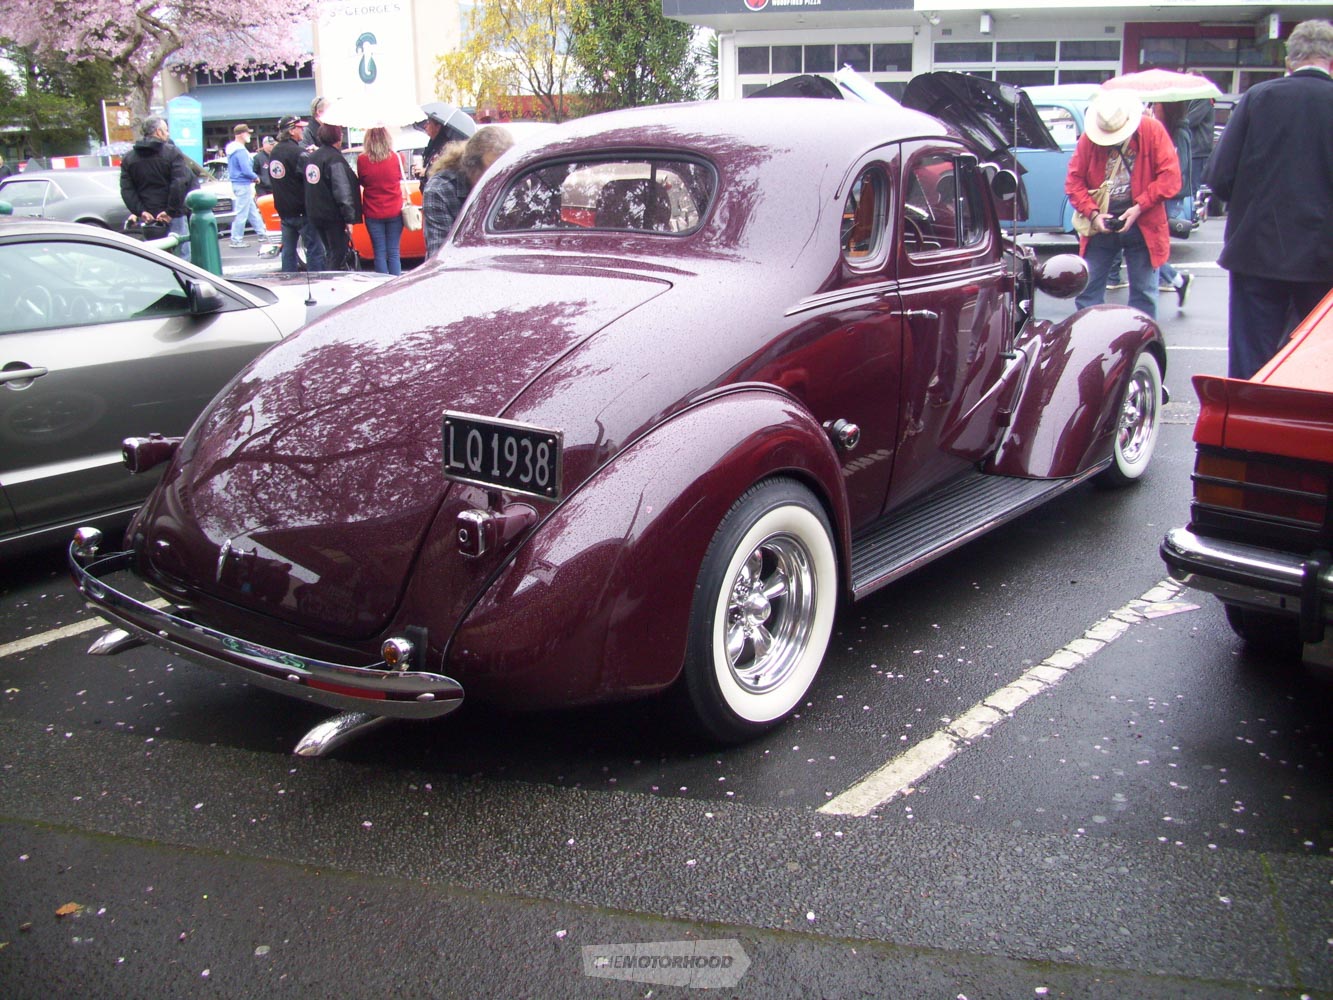 Lots of people were seen taking photos of Stuart & Gaye Andersons pristine 1938 Chev Coupe.jpg